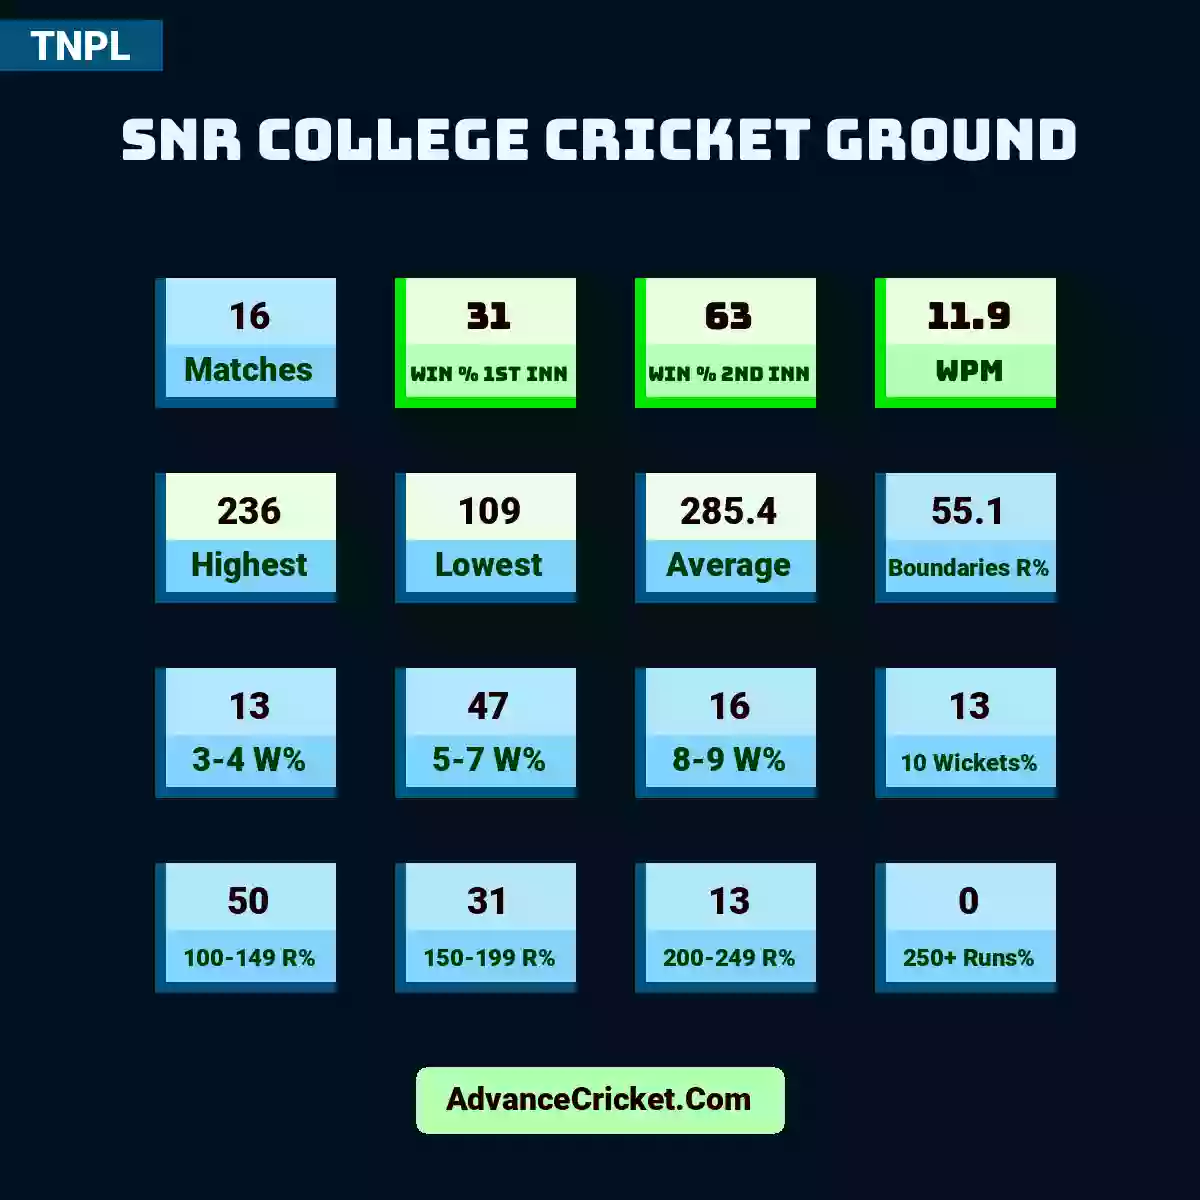 Image showing SNR College Cricket Ground with Matches: 16, Win % 1st Inn: 31, Win % 2nd Inn: 63, WPM: 11.9, Highest: 236, Lowest: 109, Average: 285.4, Boundaries R%: 55.1, 3-4 W%: 13, 5-7 W%: 47, 8-9 W%: 16, 10 Wickets%: 13, 100-149 R%: 50, 150-199 R%: 31, 200-249 R%: 13, 250+ Runs%: 0.